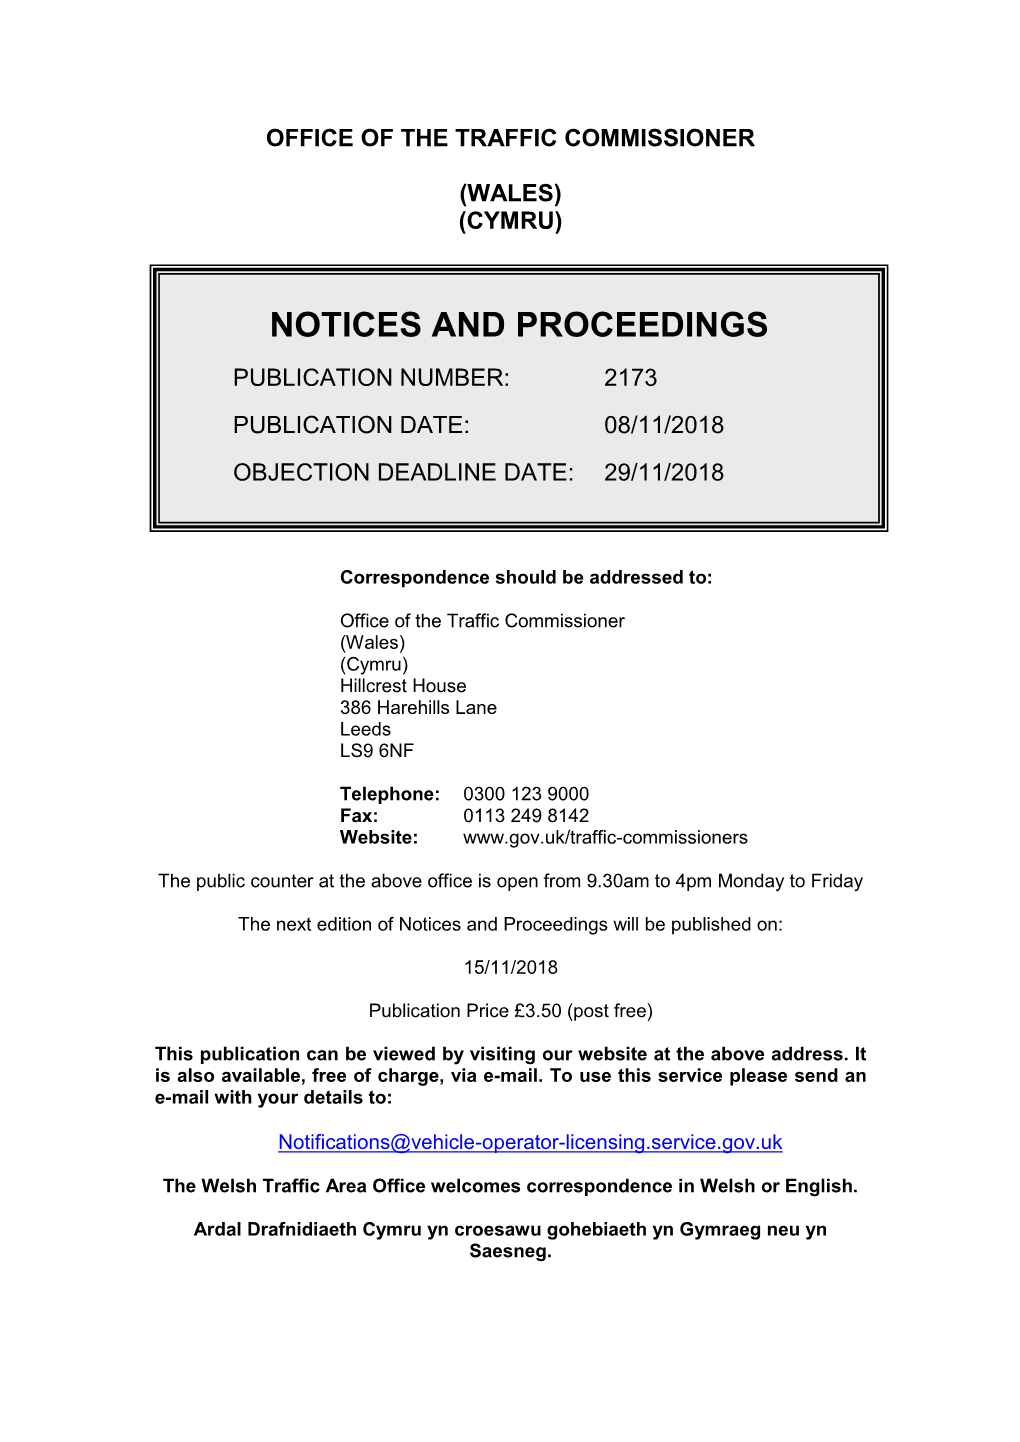 Notices and Proceedings for Wales